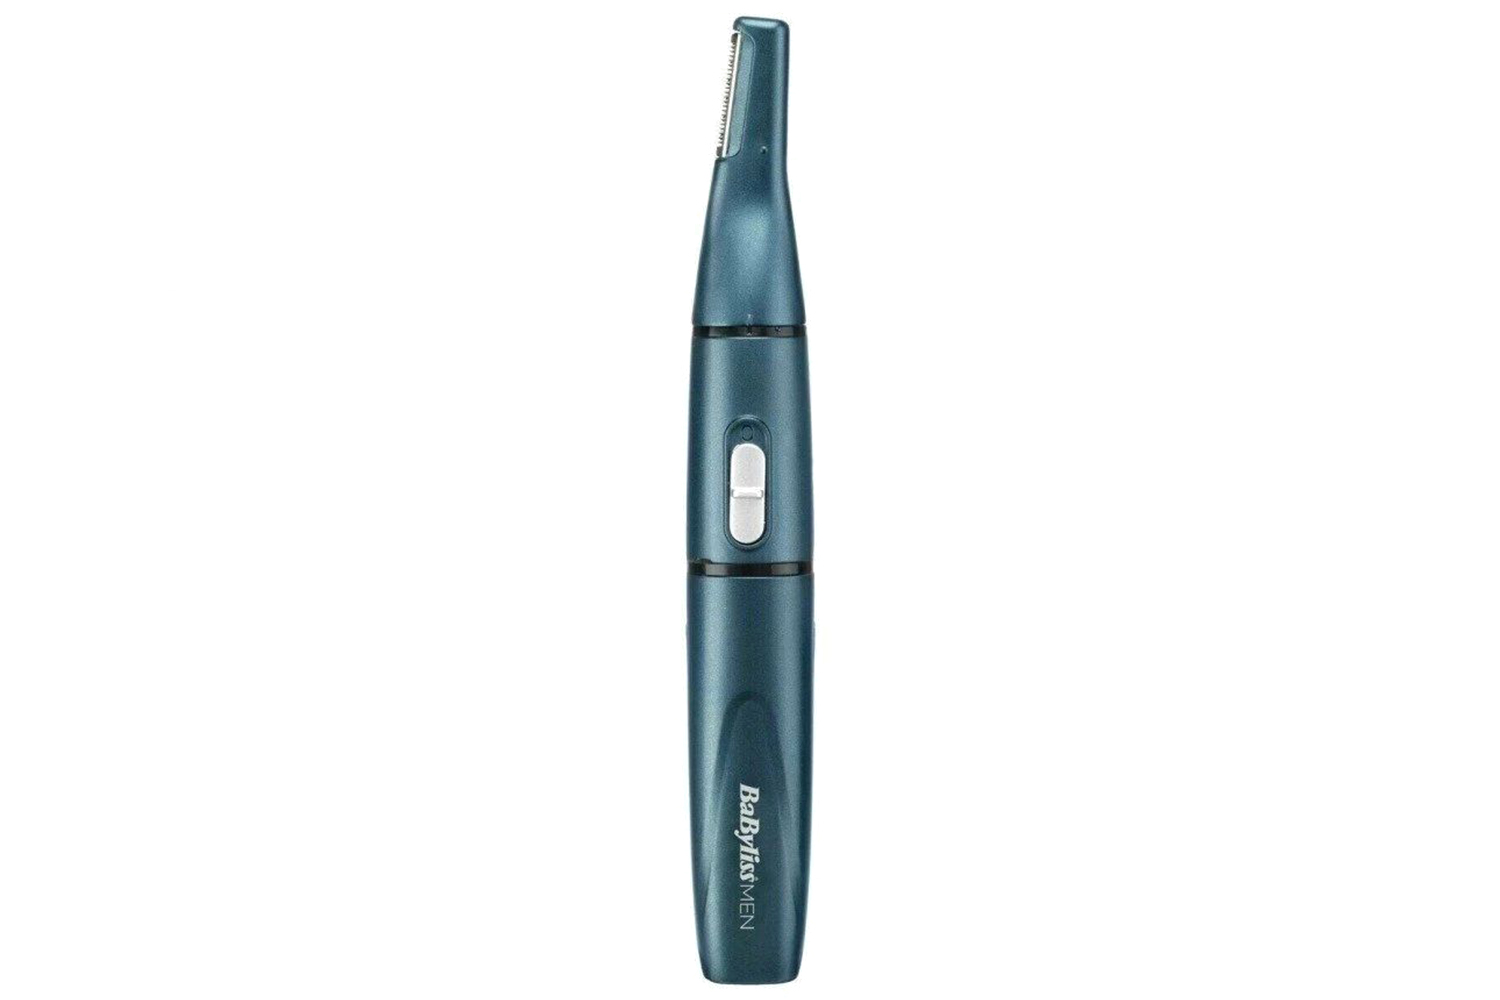 babyliss clippers ireland